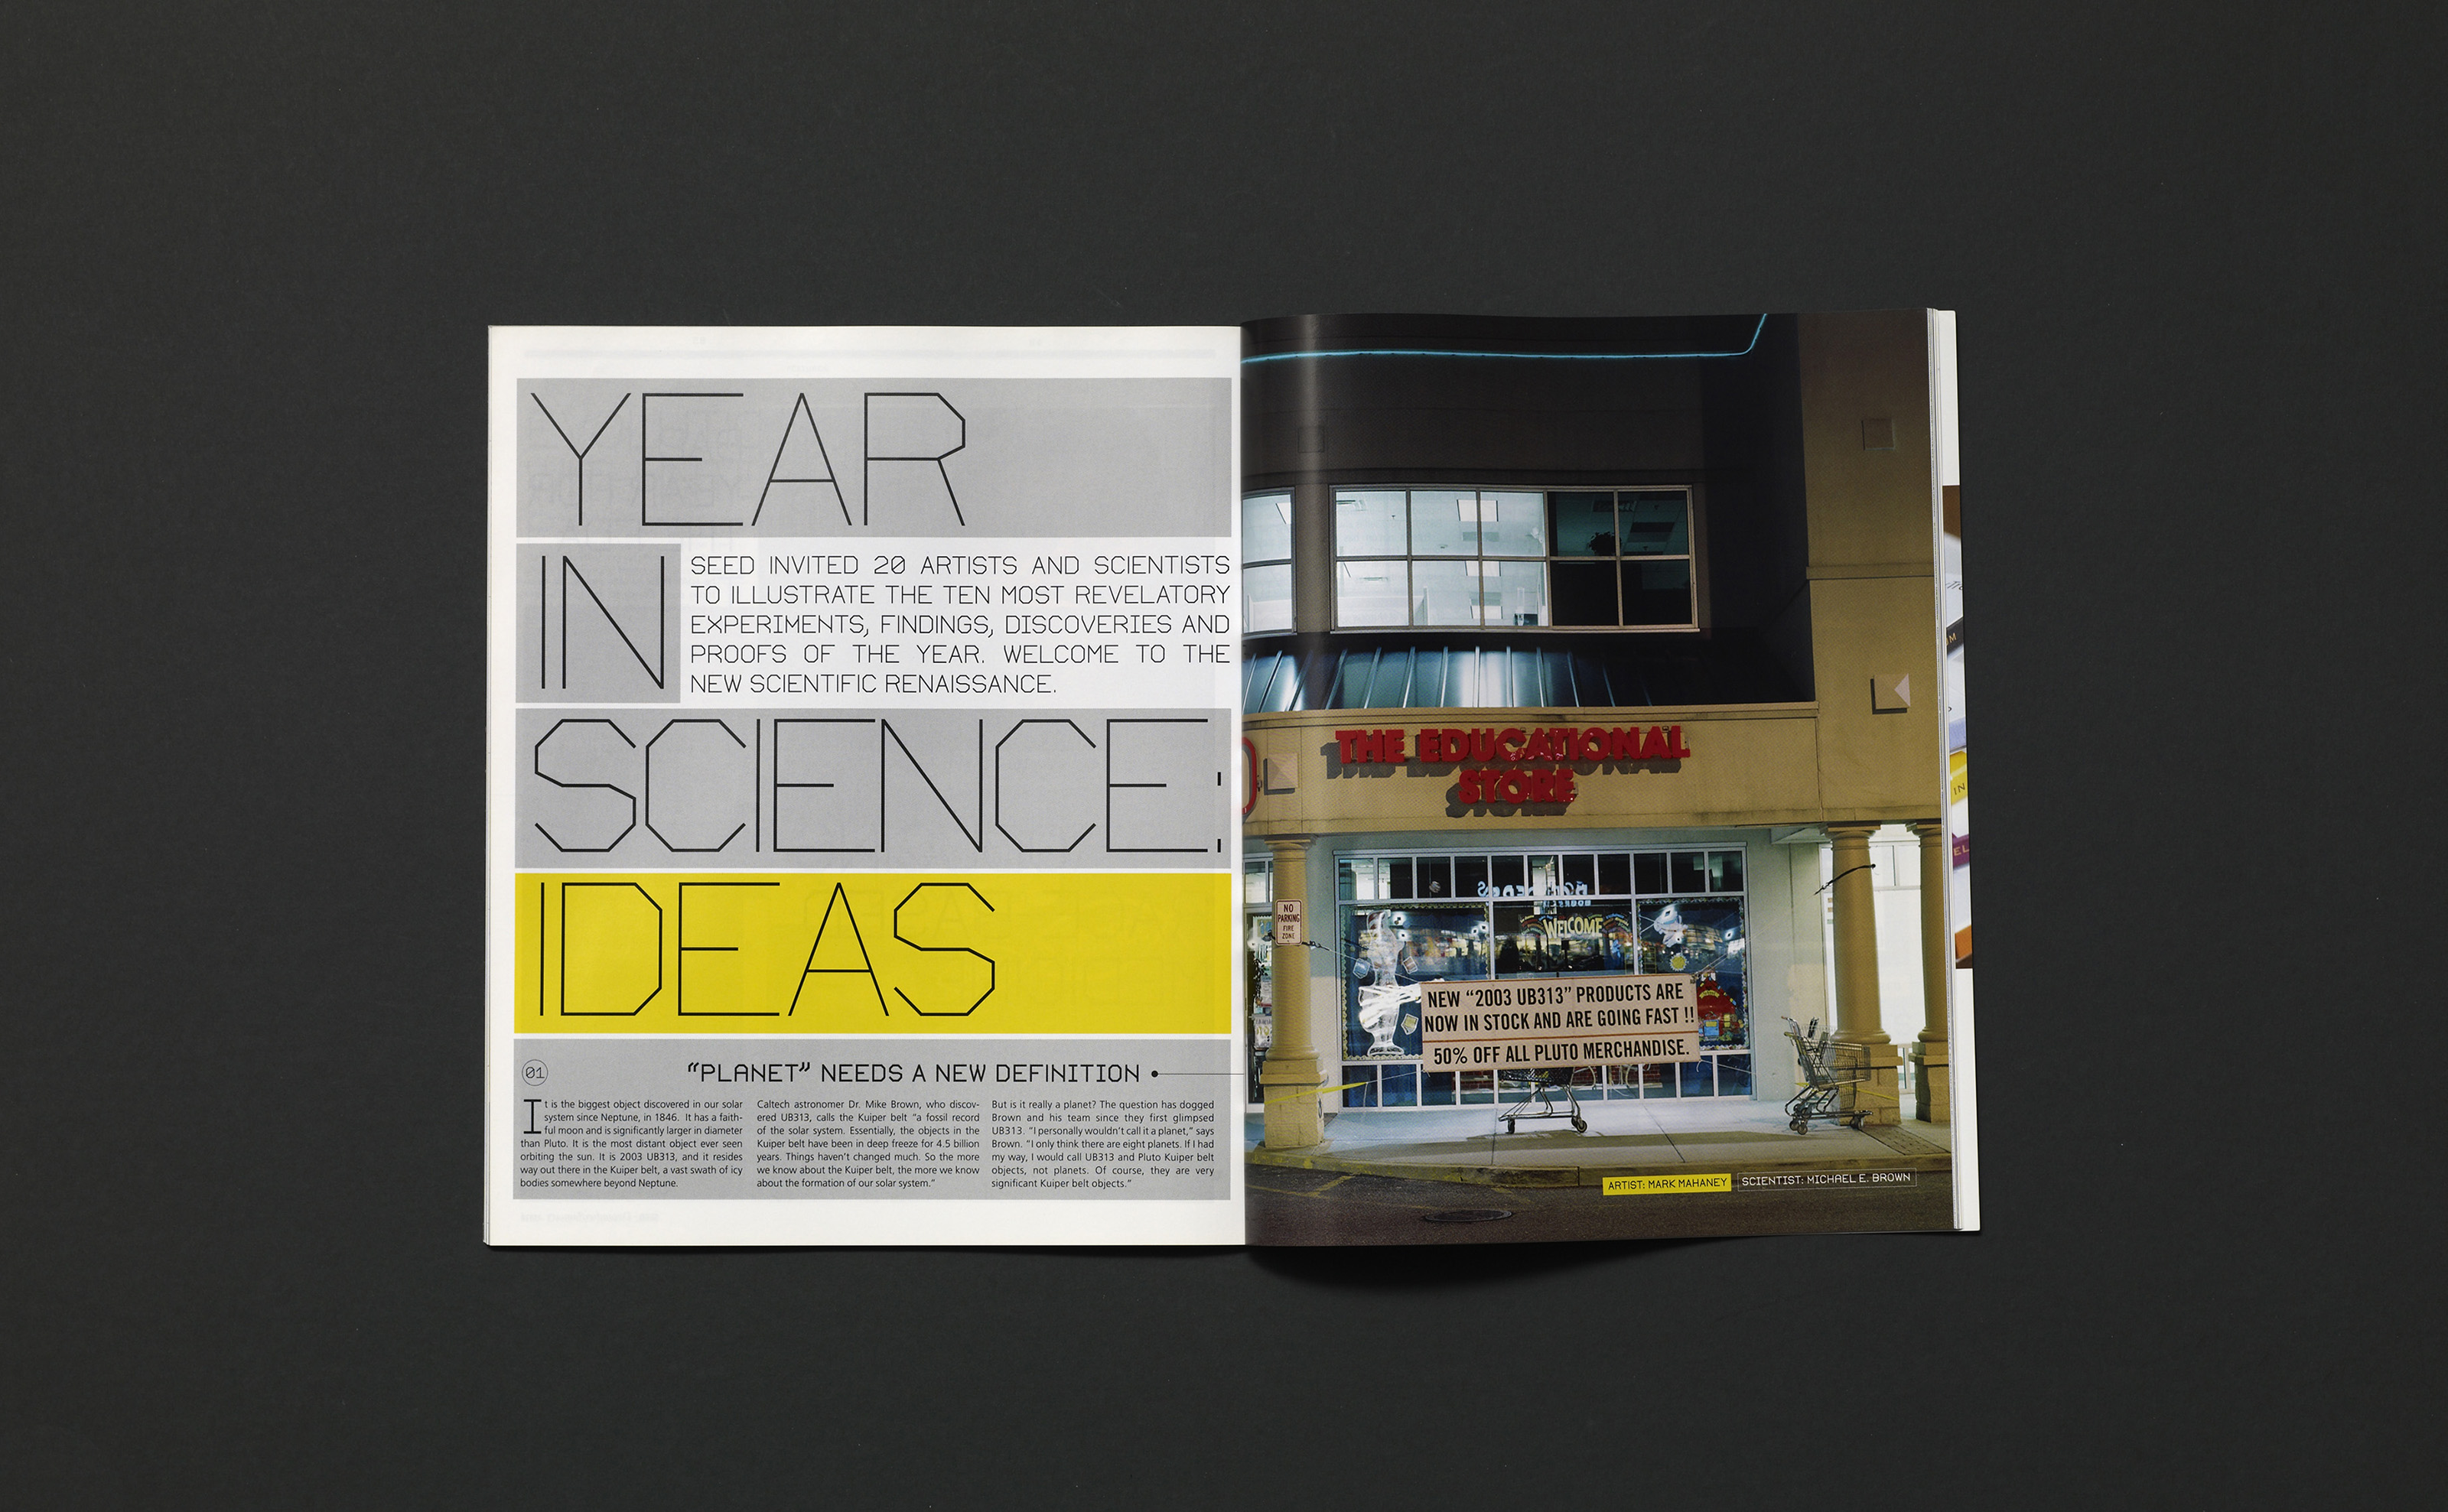 SEED magazine year in science ideas